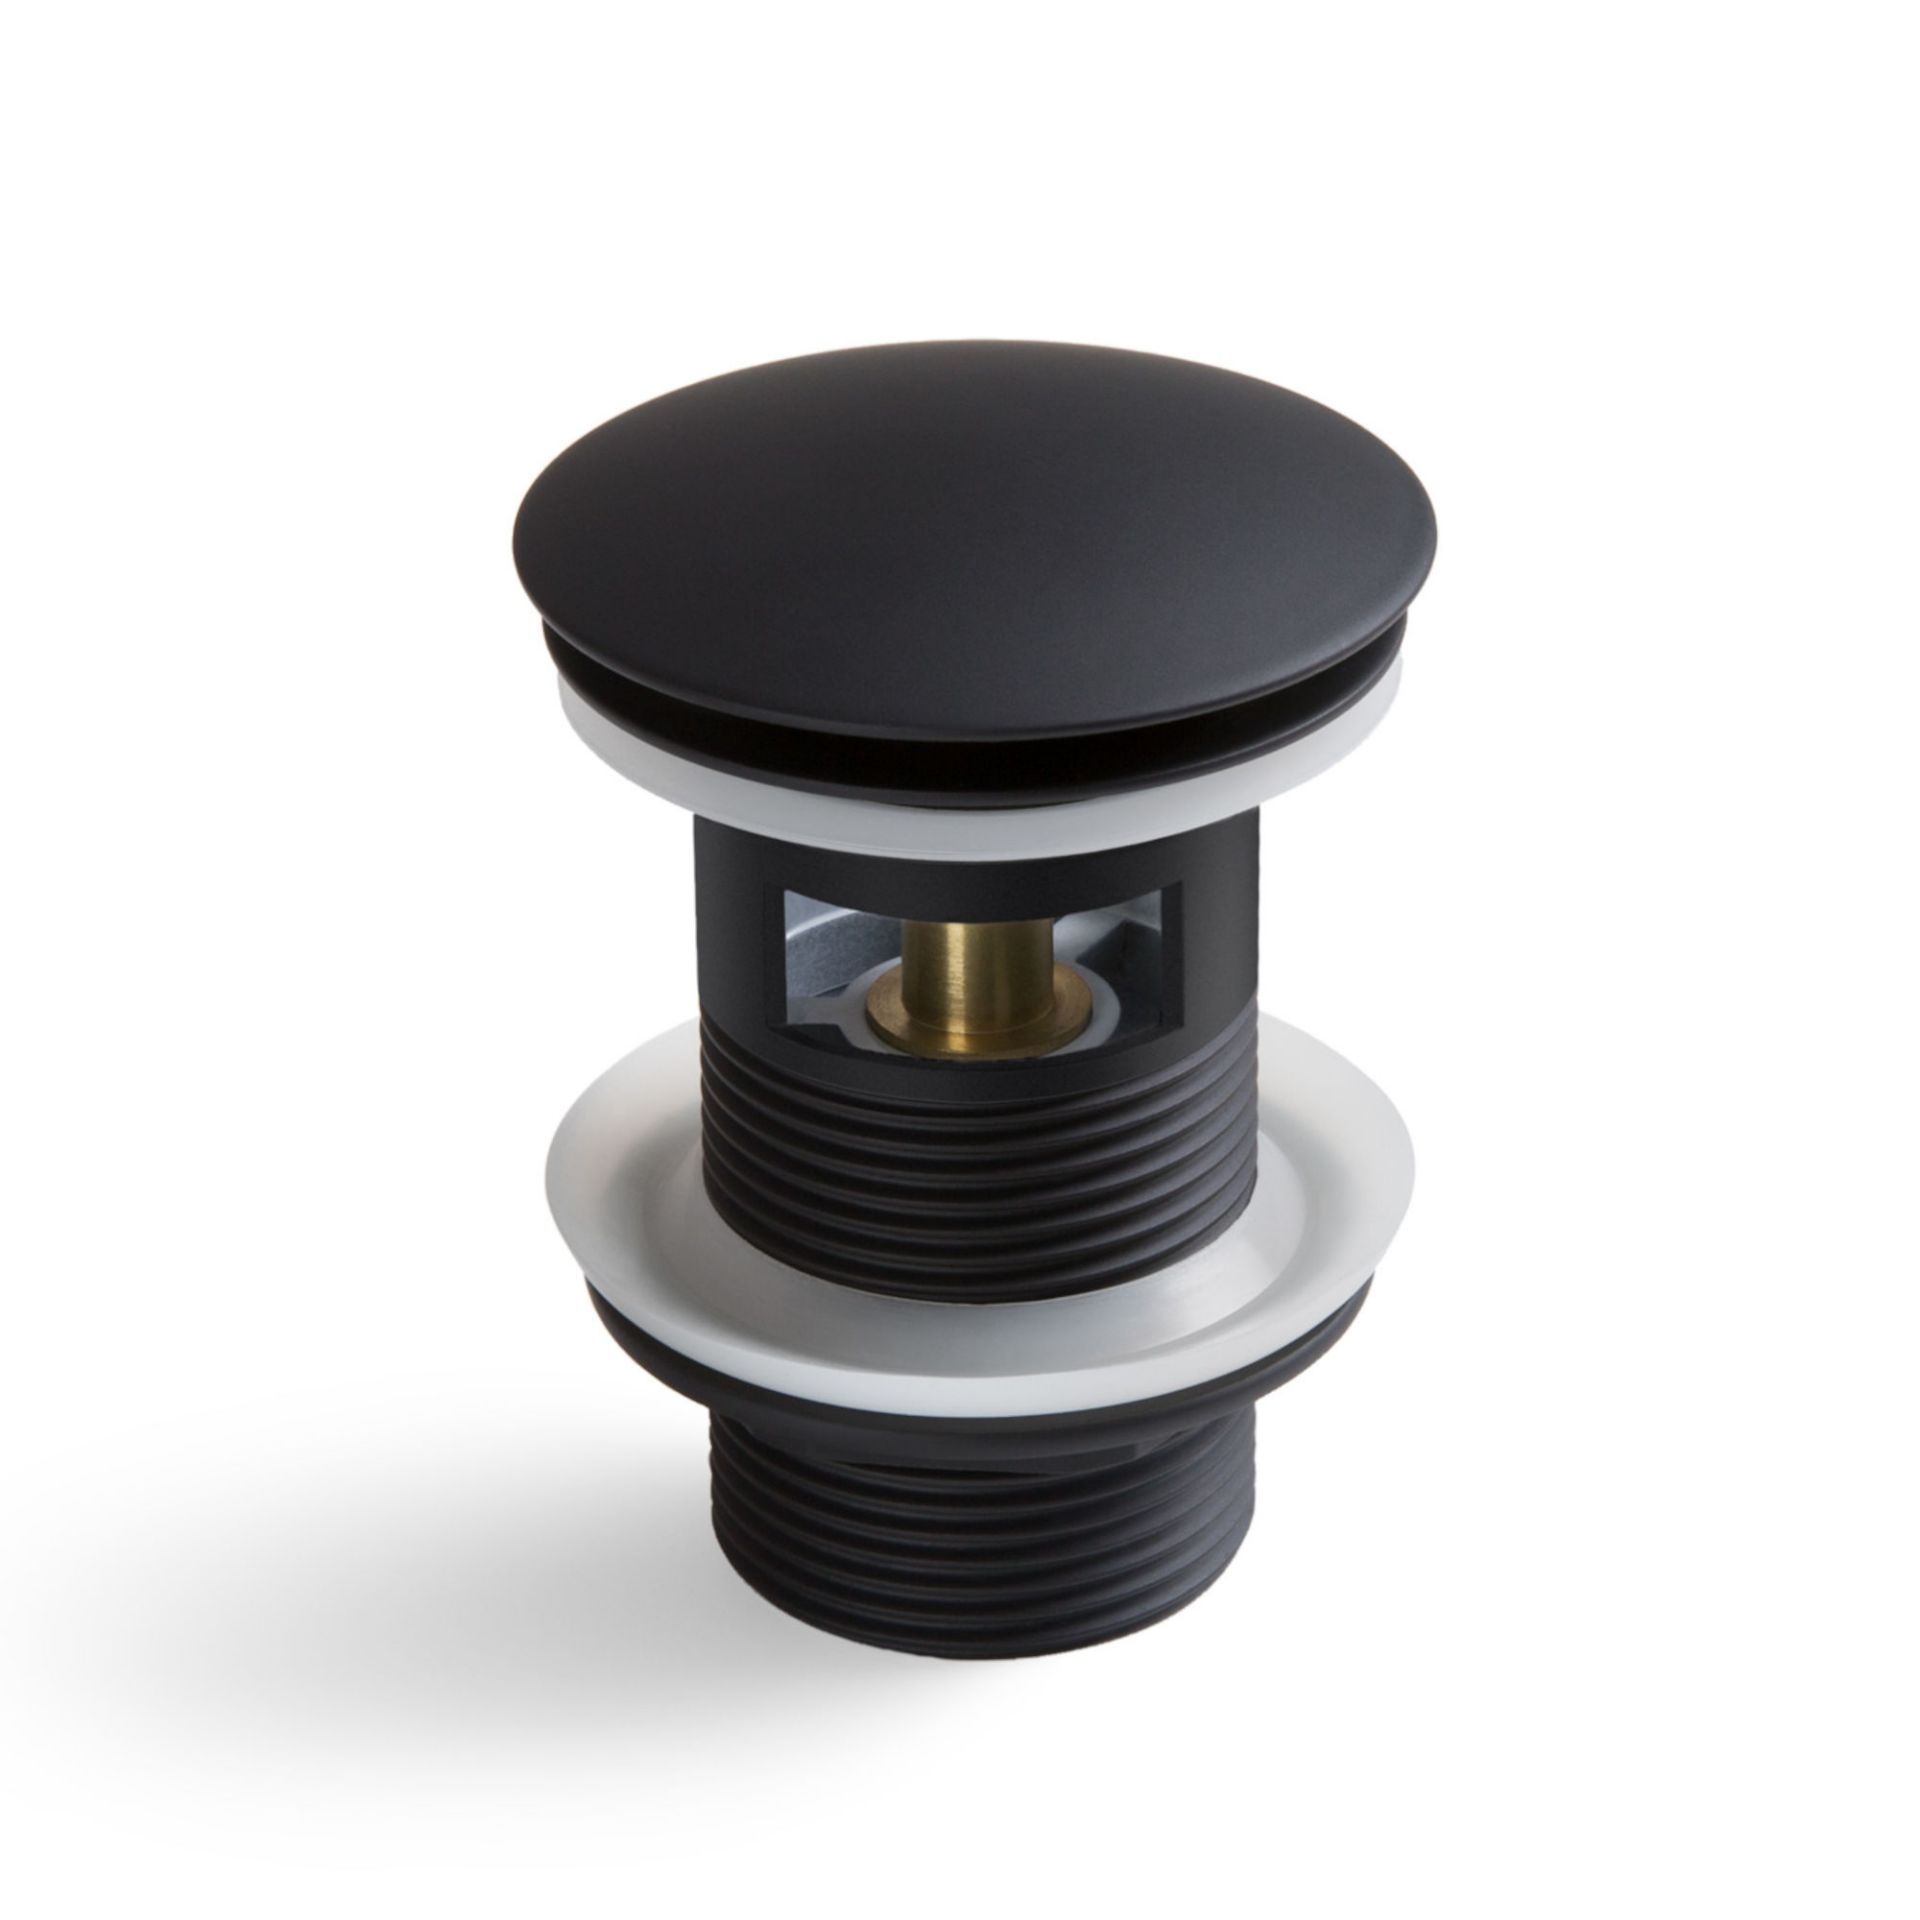 NEW (NV1005) Black Slotted Push Button Pop-Up Basin Waste Made with zinc with solid brass comp... - Image 2 of 3